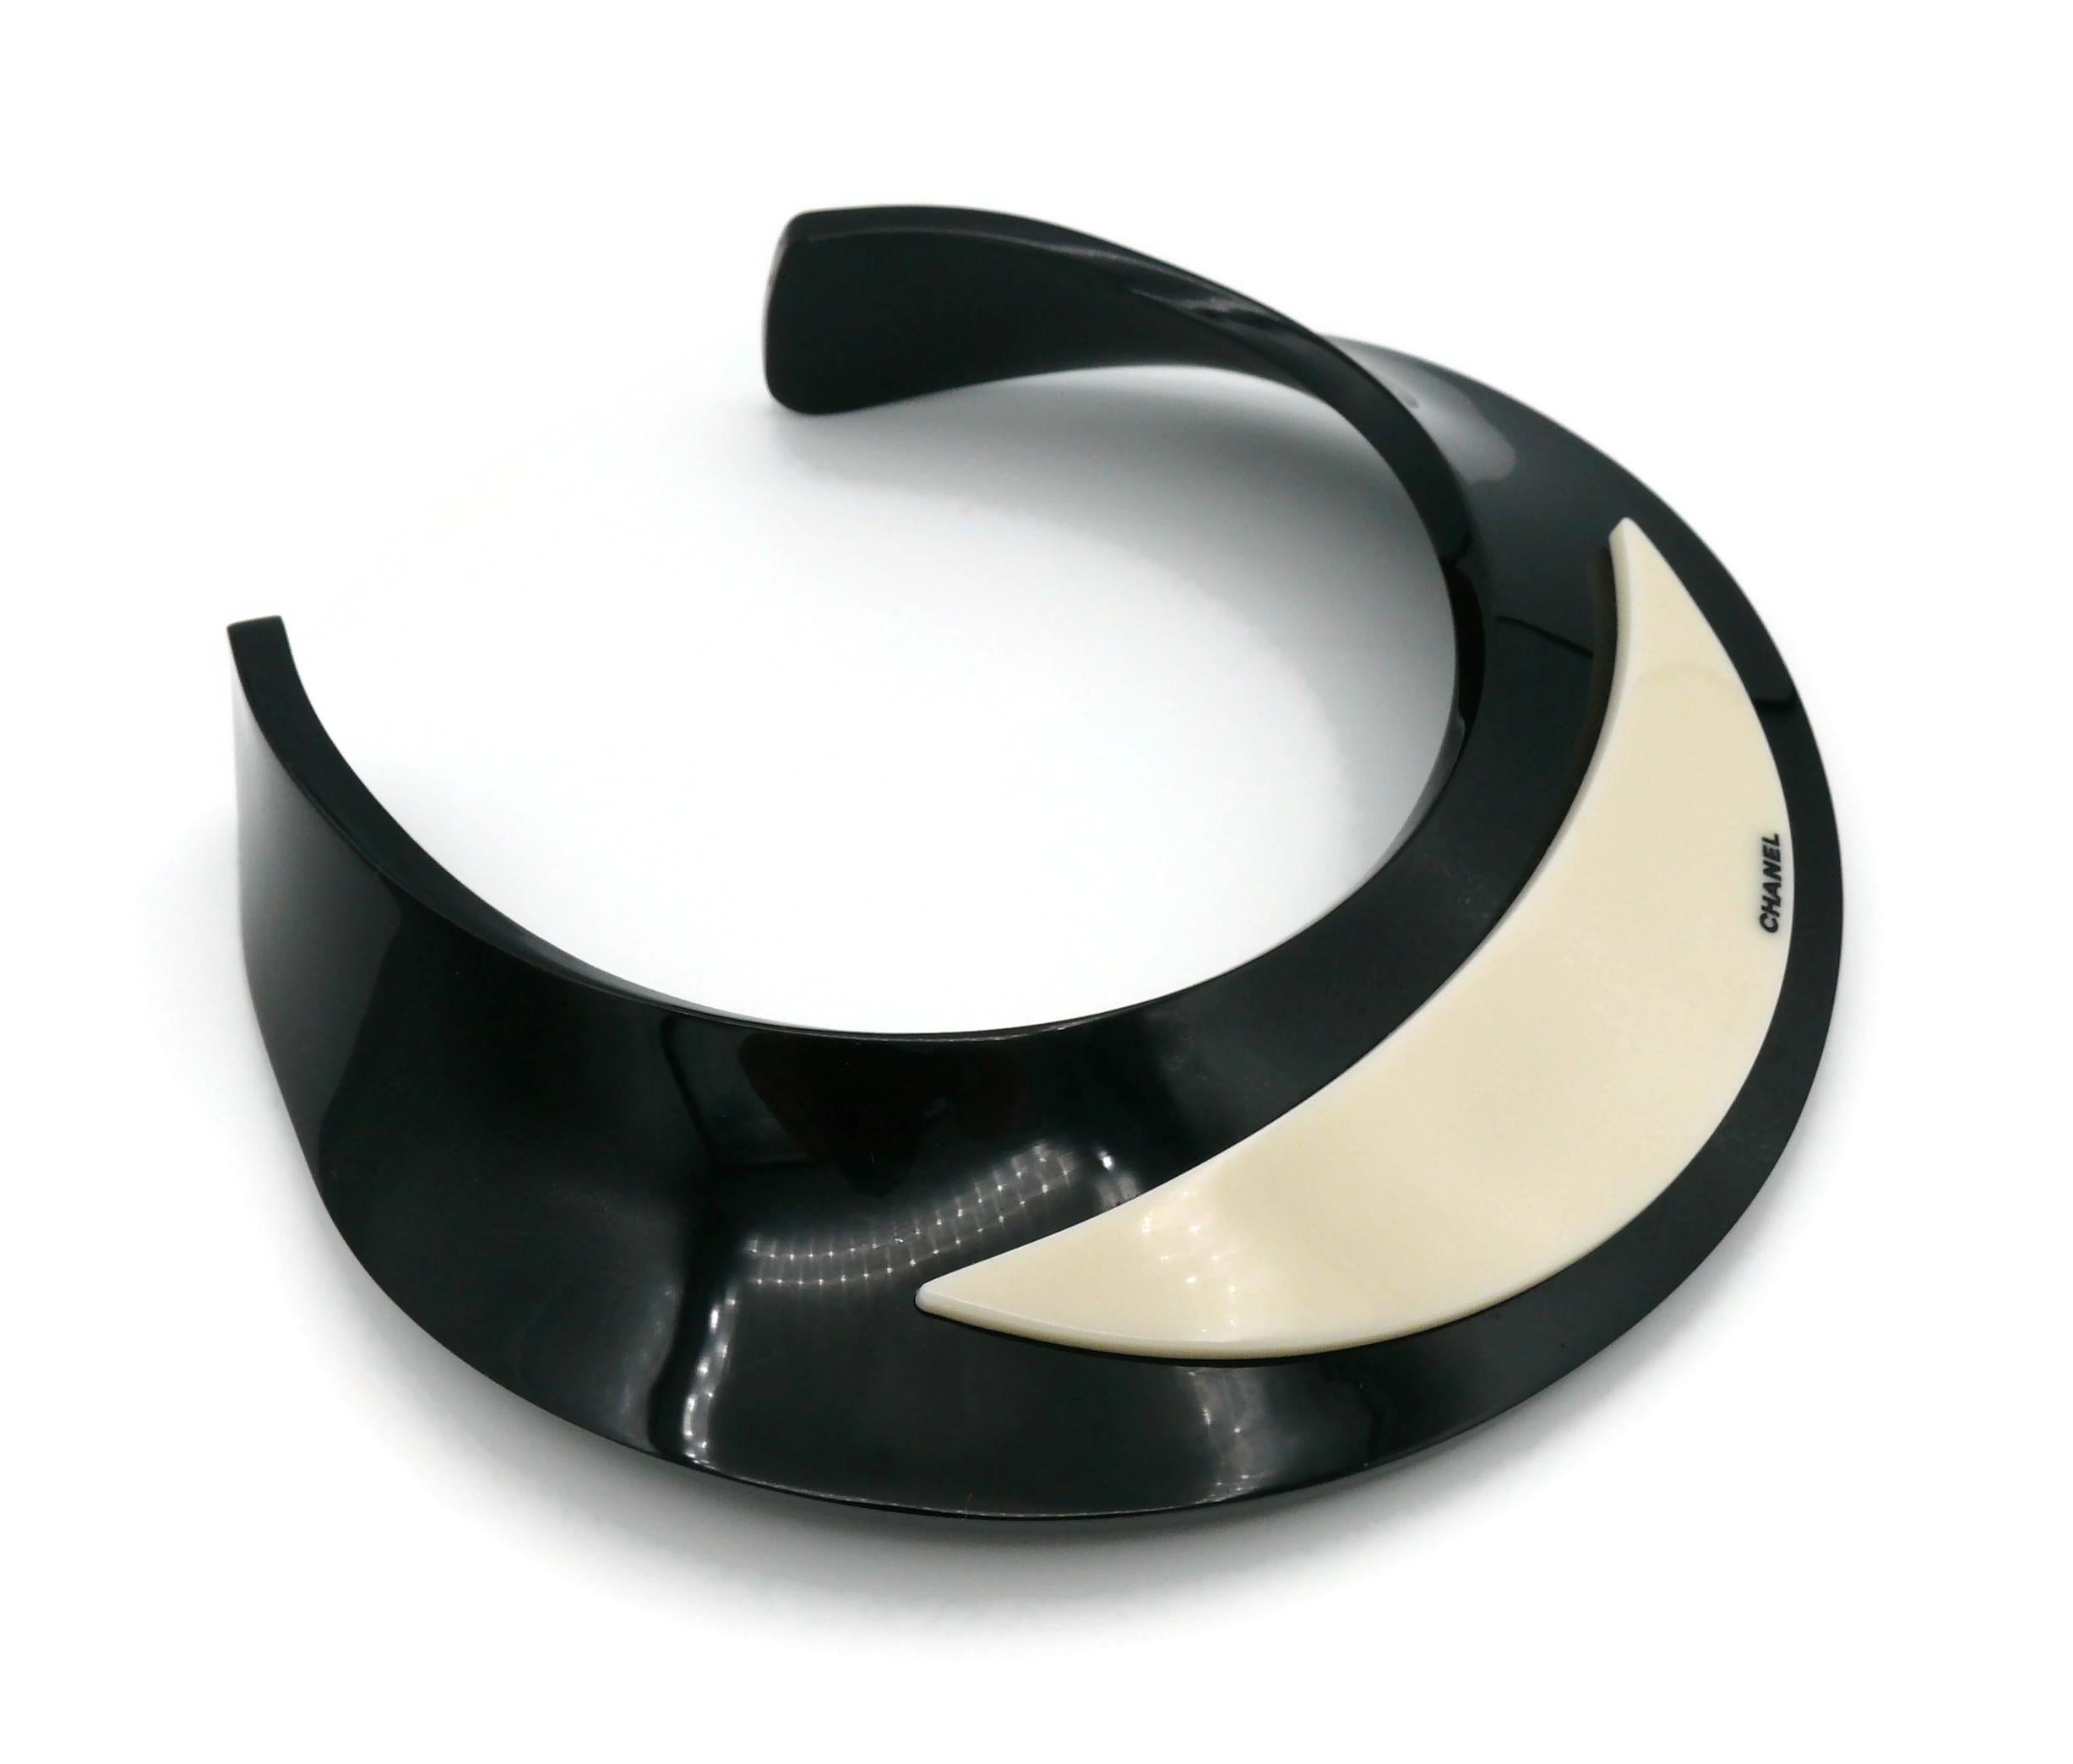 CHANEL by KARL LAGERFELD Black and White Resin Choker Necklace, Fall 2007 In Good Condition For Sale In Nice, FR